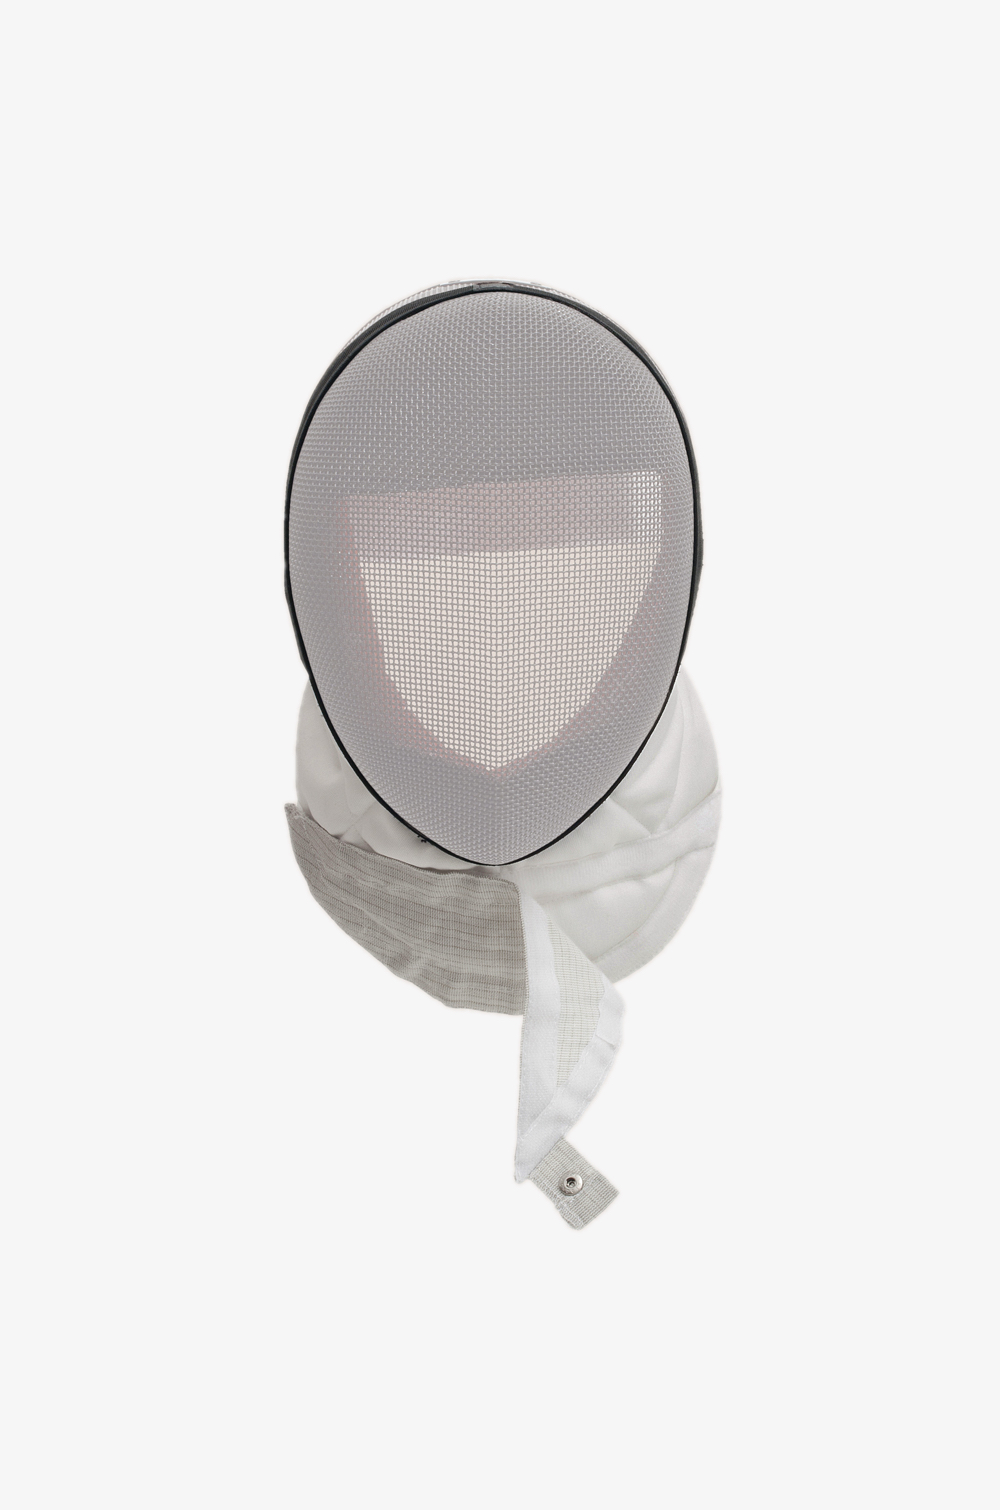 Replacement of the Bib FIE Vario Mask